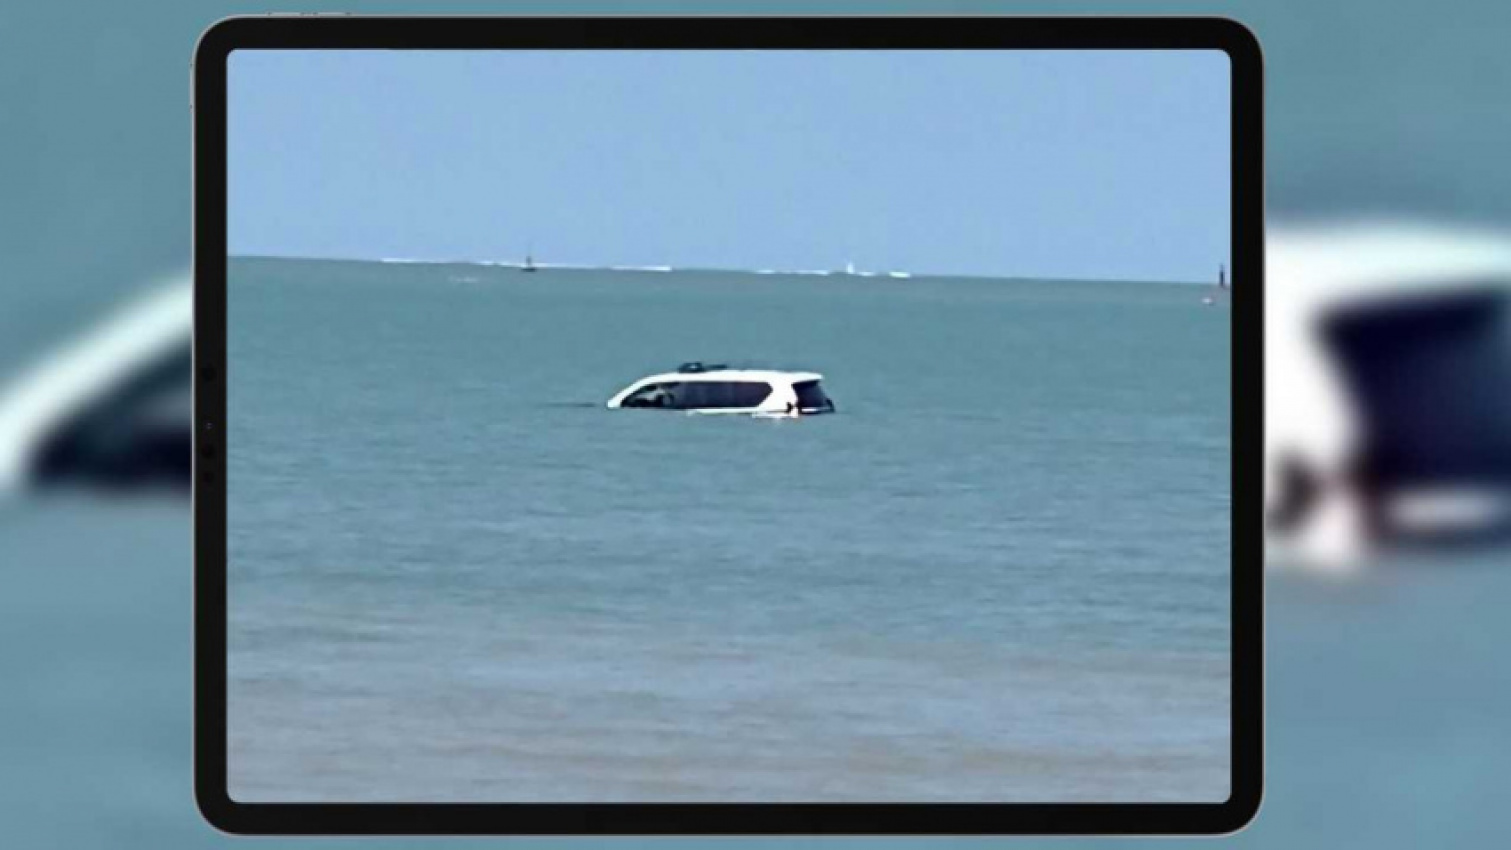 autos, cars, toyota, land cruiser, land cruiser police car gets stuck on beach, then is swamped by the tide